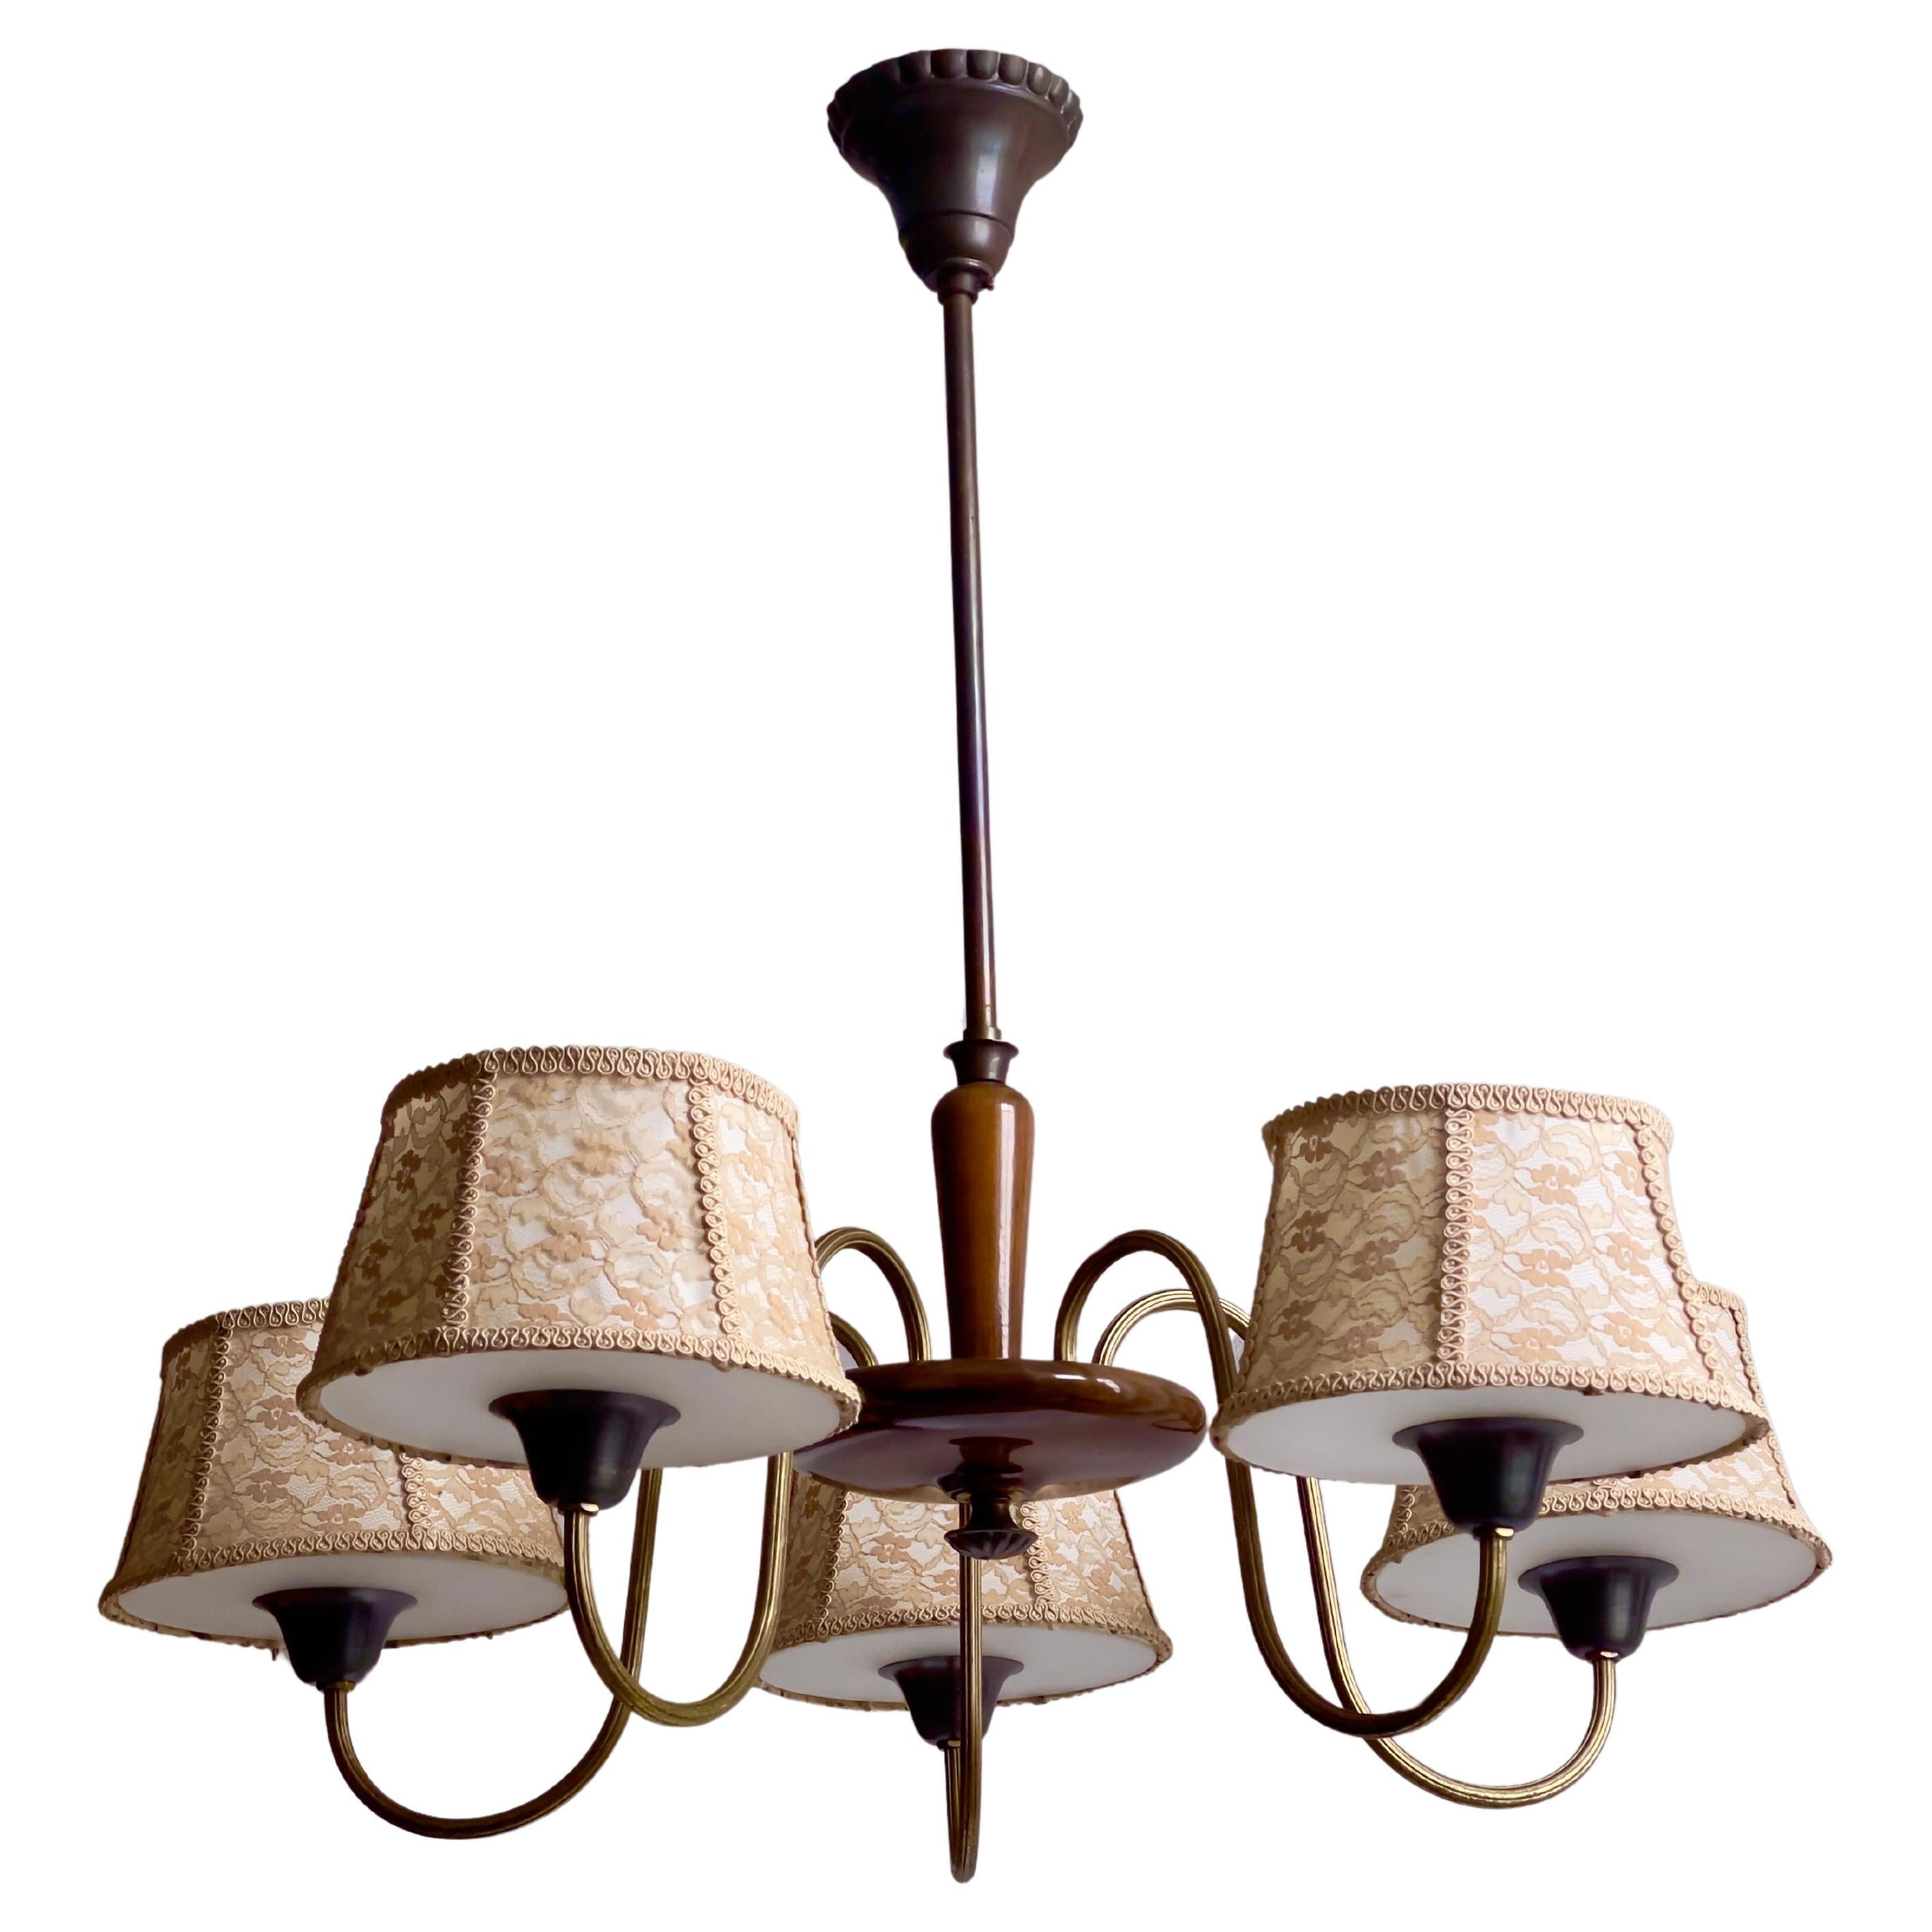 1920s French Chandelier in lacquered wood, bronze, brass and frosted glass.